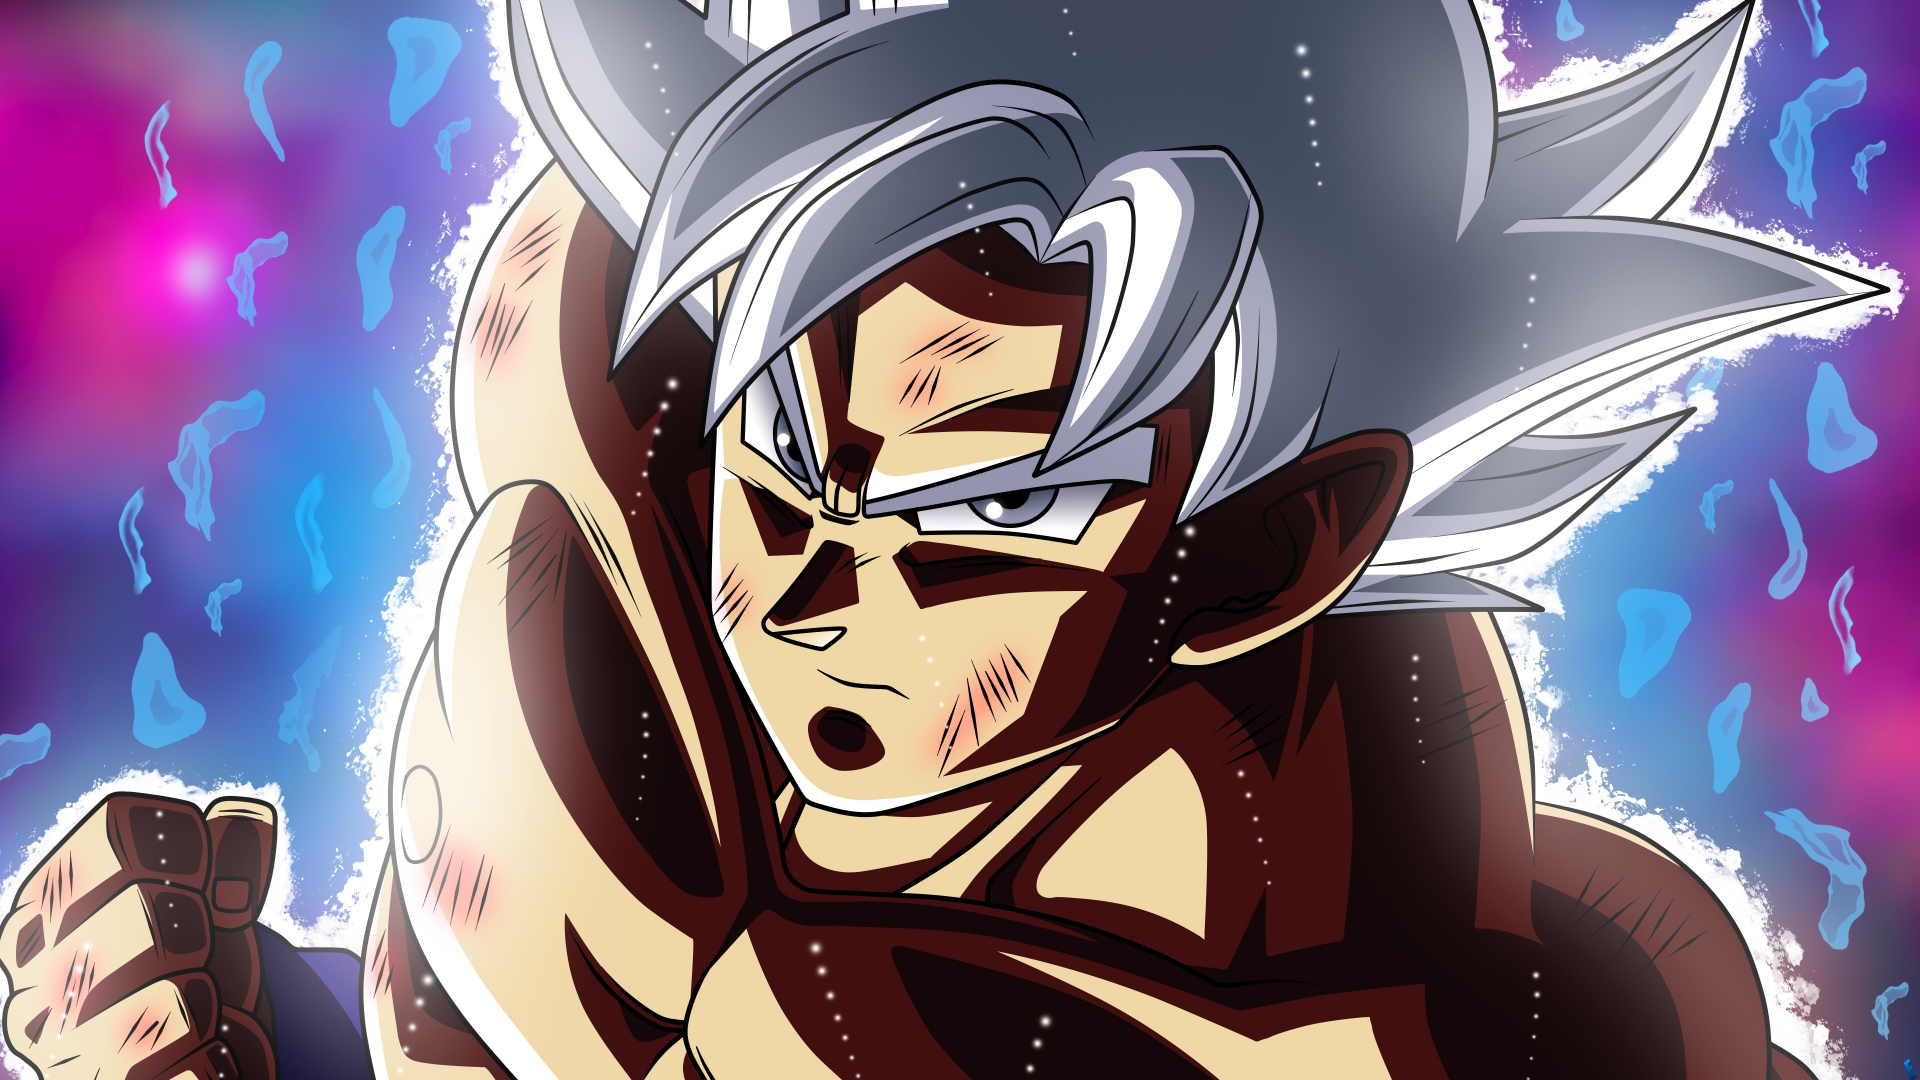 Kollege Kidd on Twitter Gohans reported Final Form In DBS Super Hero  is called Final Gohan Noticeable changes to Gohans appearance will be white  hair with a bang and red eyes Dragon